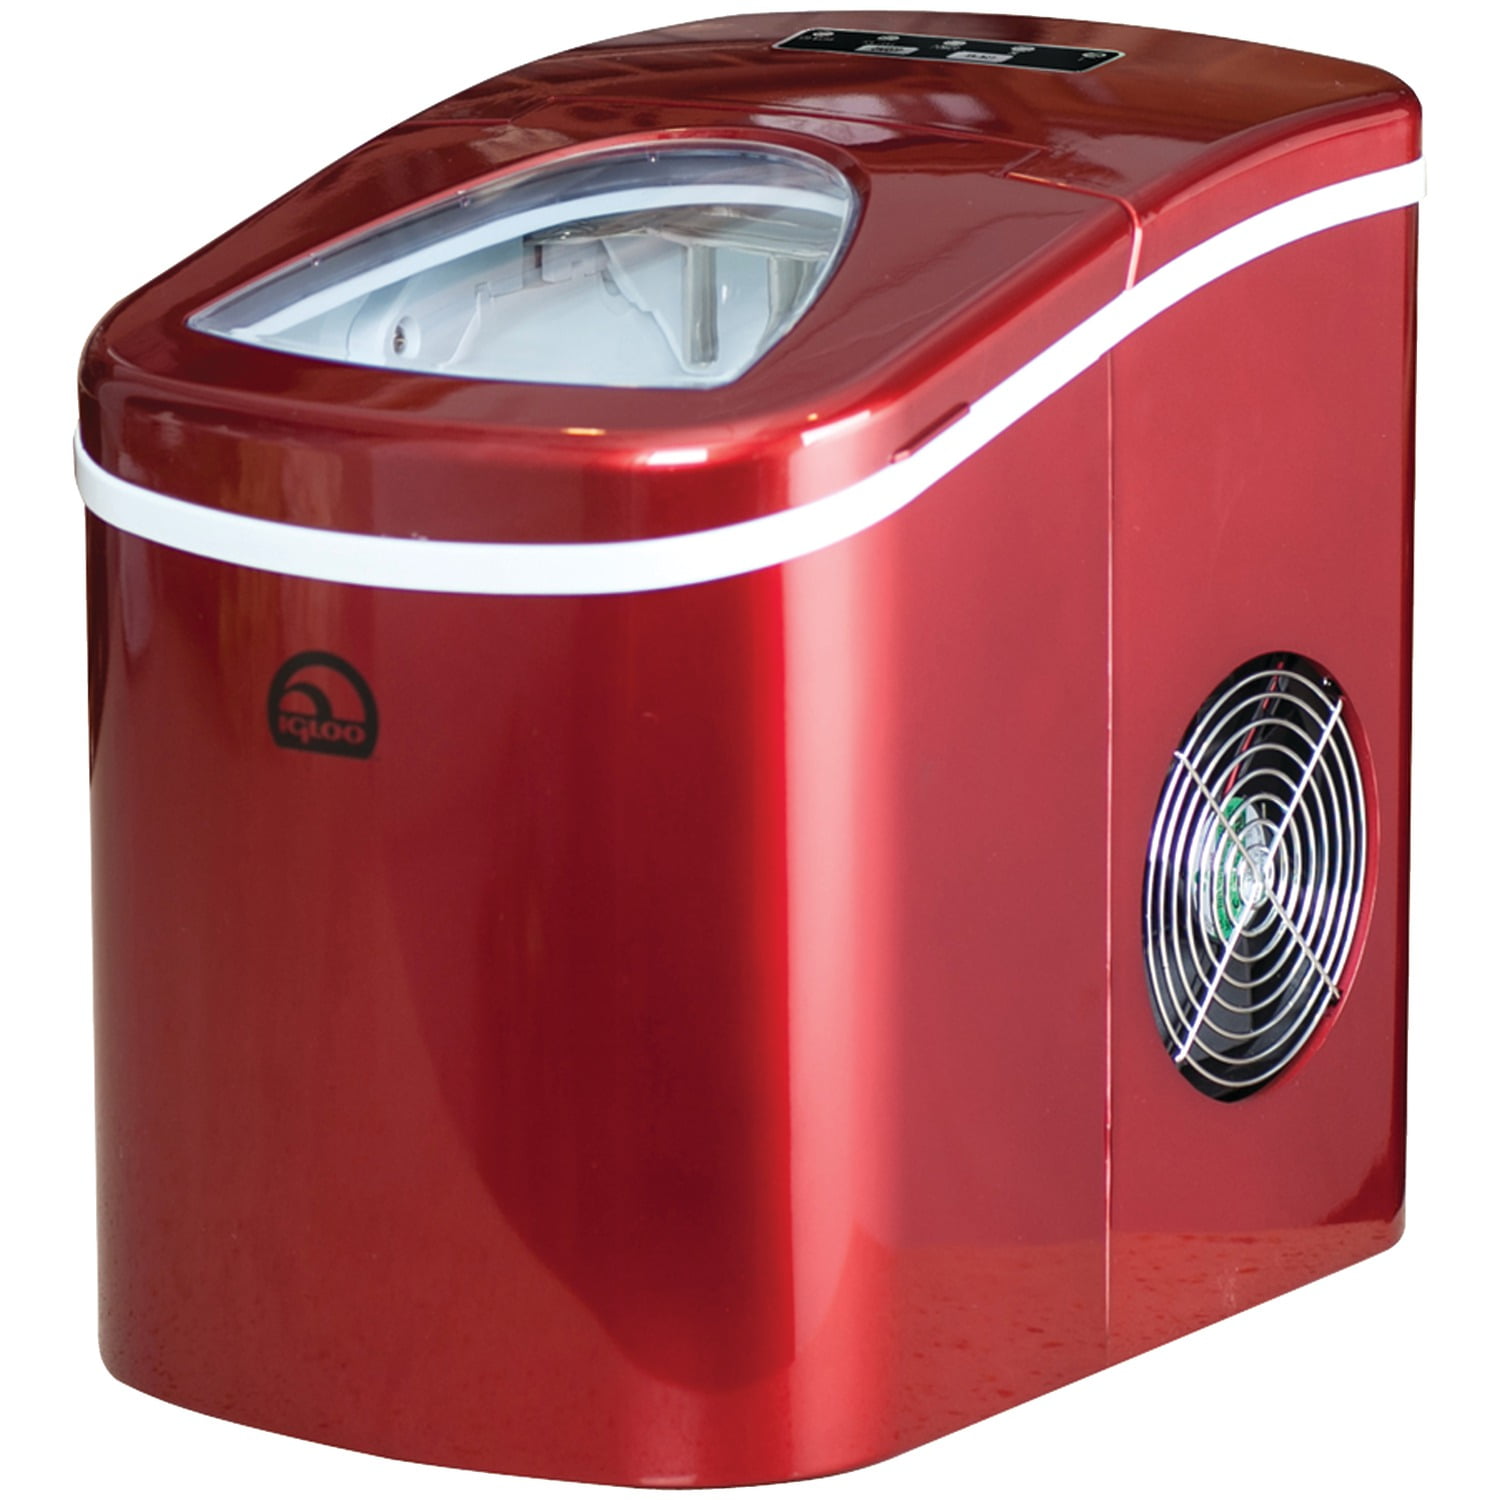 NEW Igloo Red ICE102 Portable Countertop Electronic Ice Maker +Scooper,  Tray 782386473110